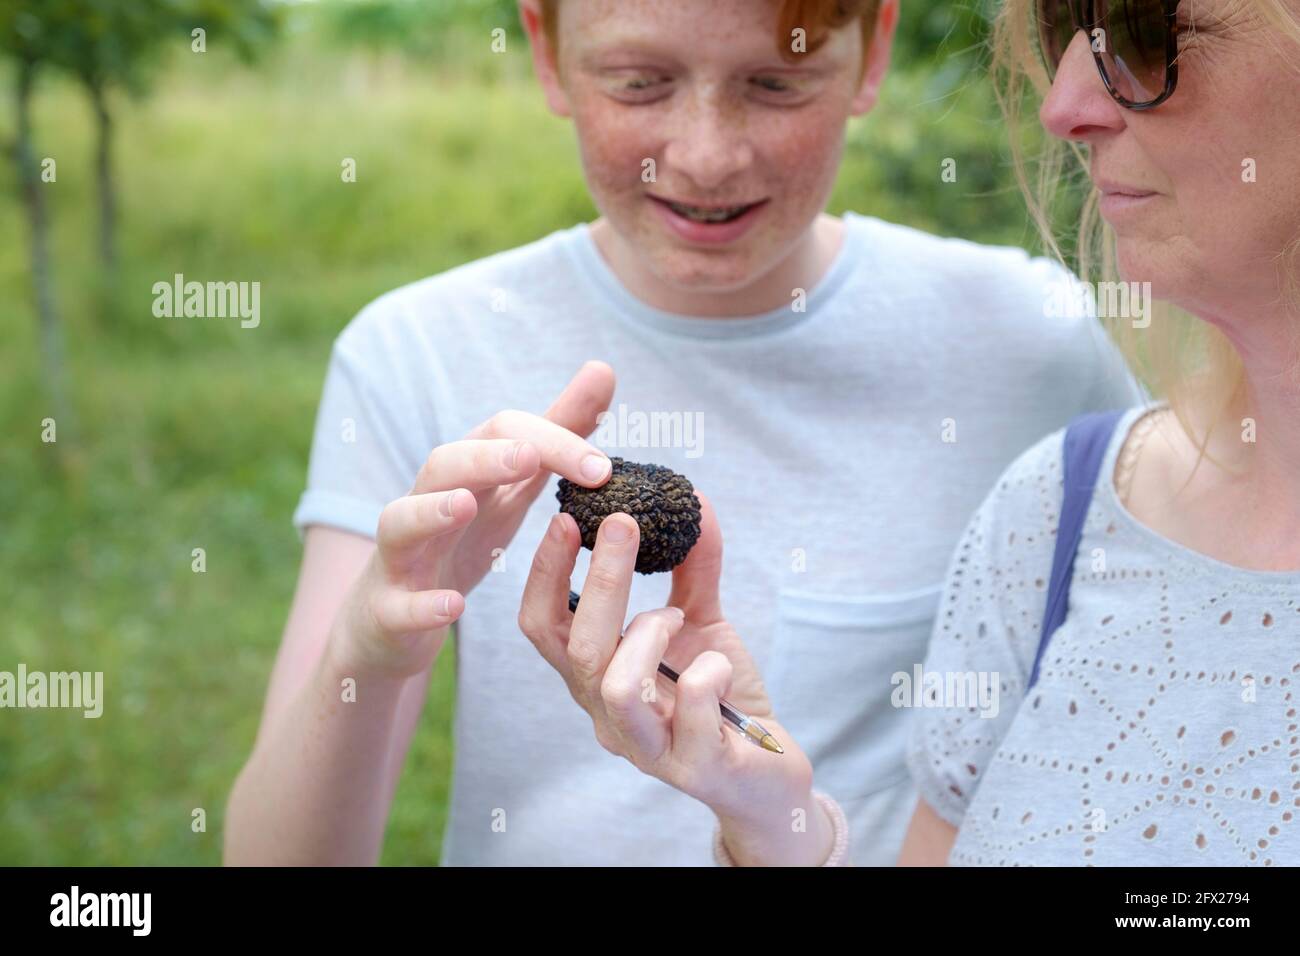 Examining a black truffle that has just been dug from the forest in Buzet, Croatia. Stock Photo